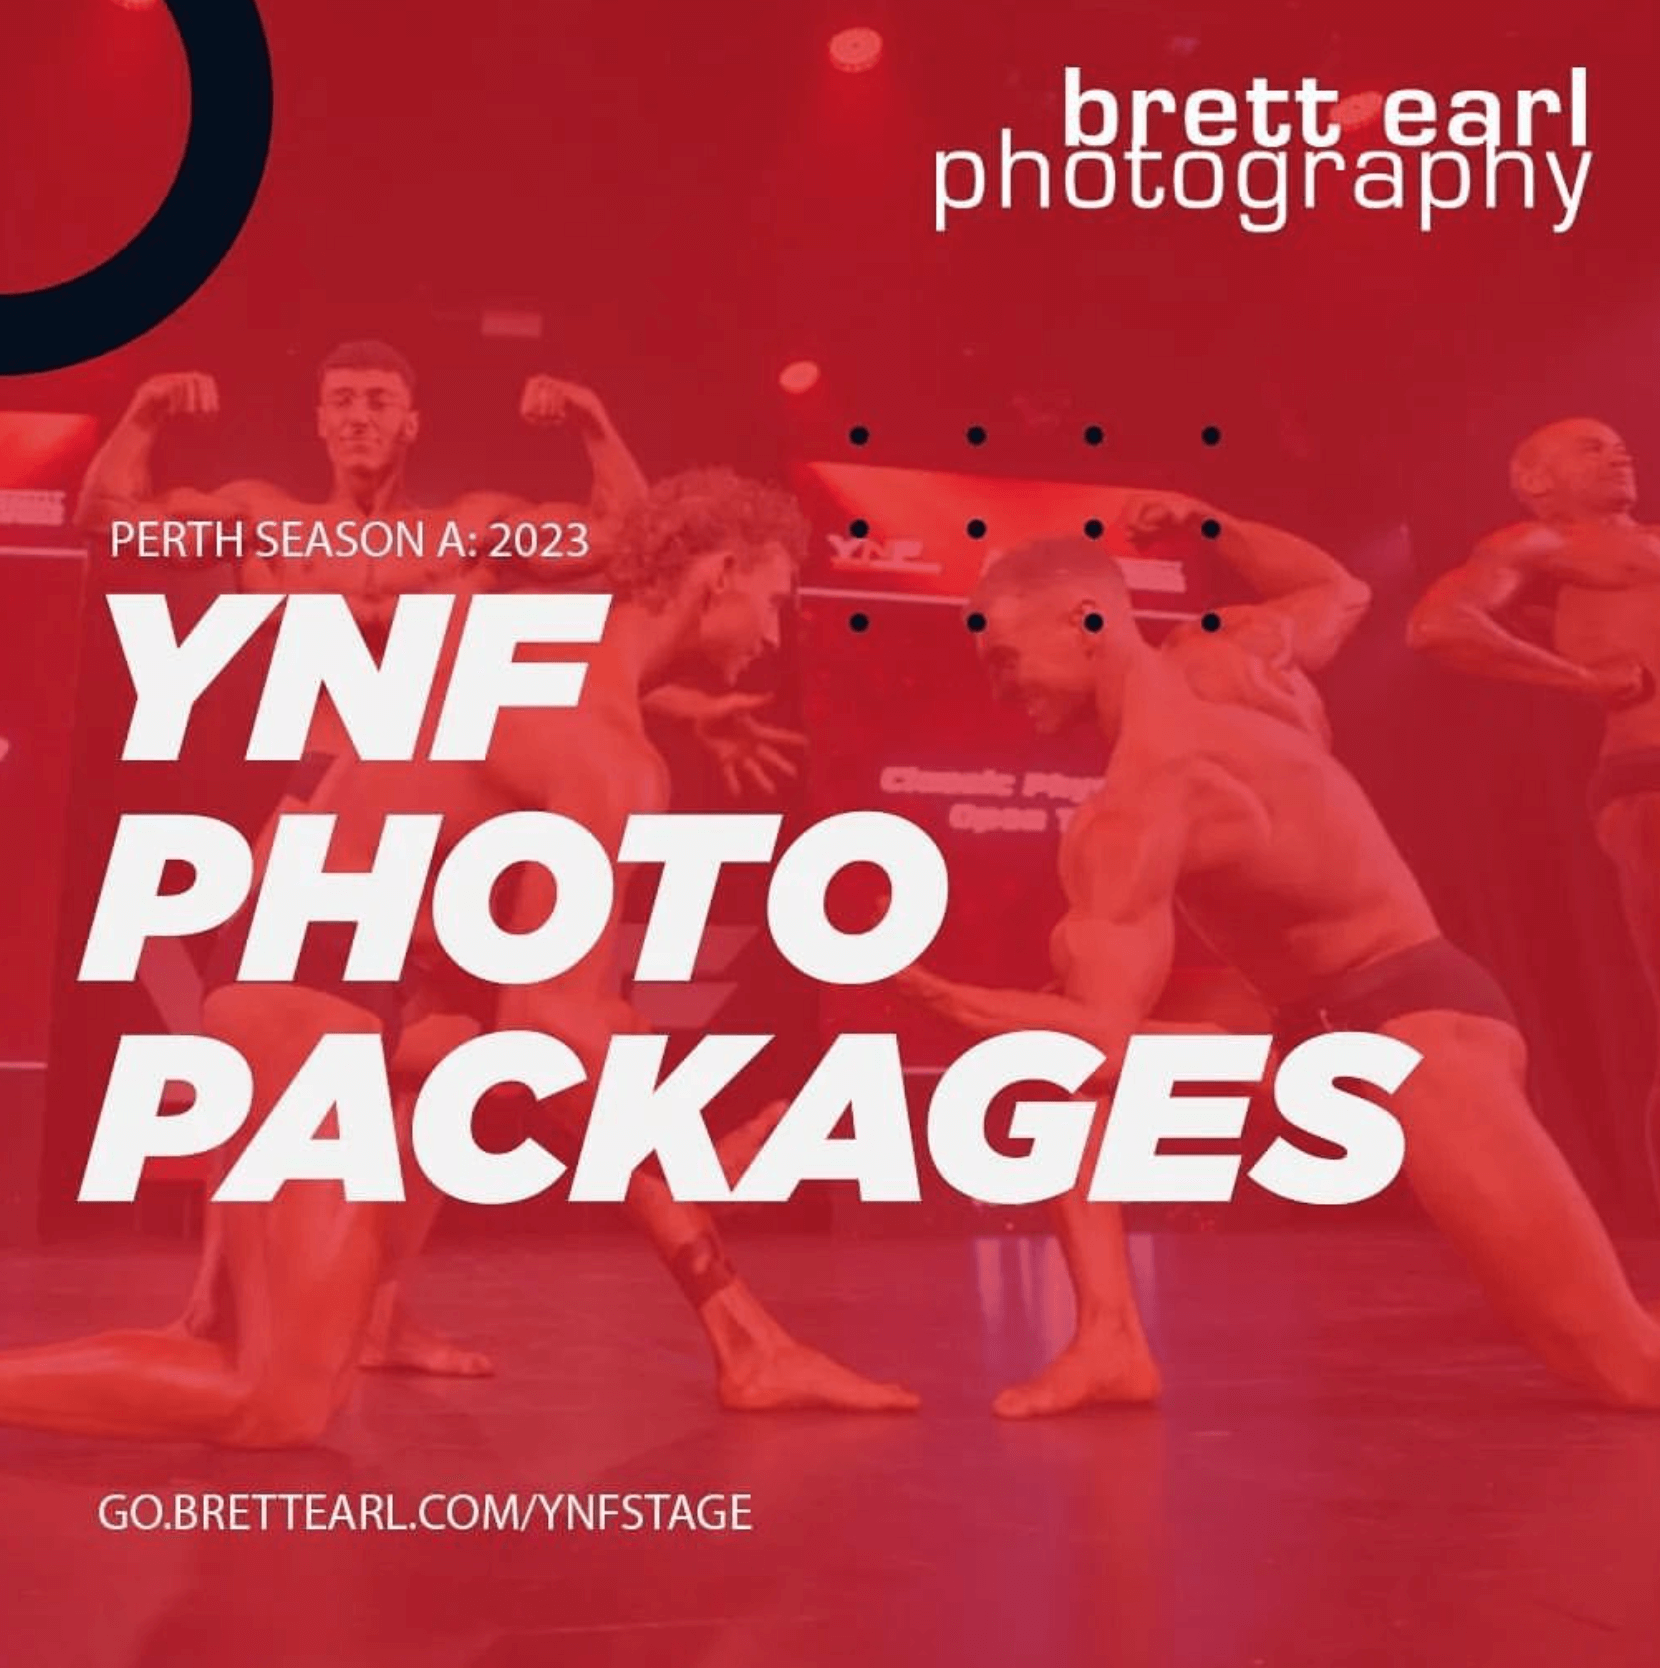 Promo saying YNF Photo Packages